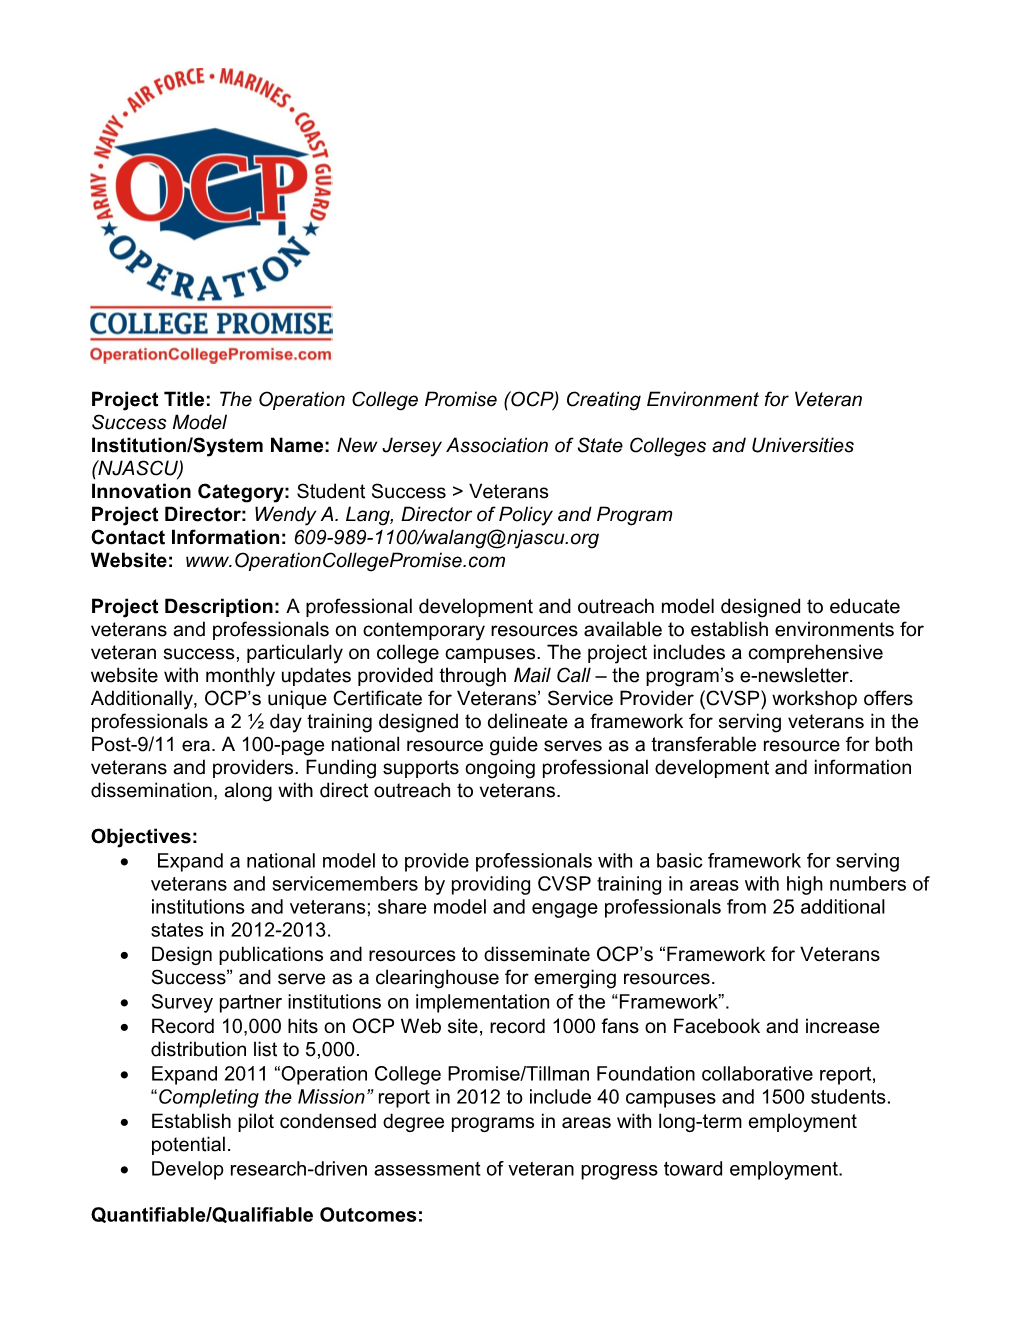 The Operation College Promise (OCP) Creating Environment for Veteran Success Model (MS Word)